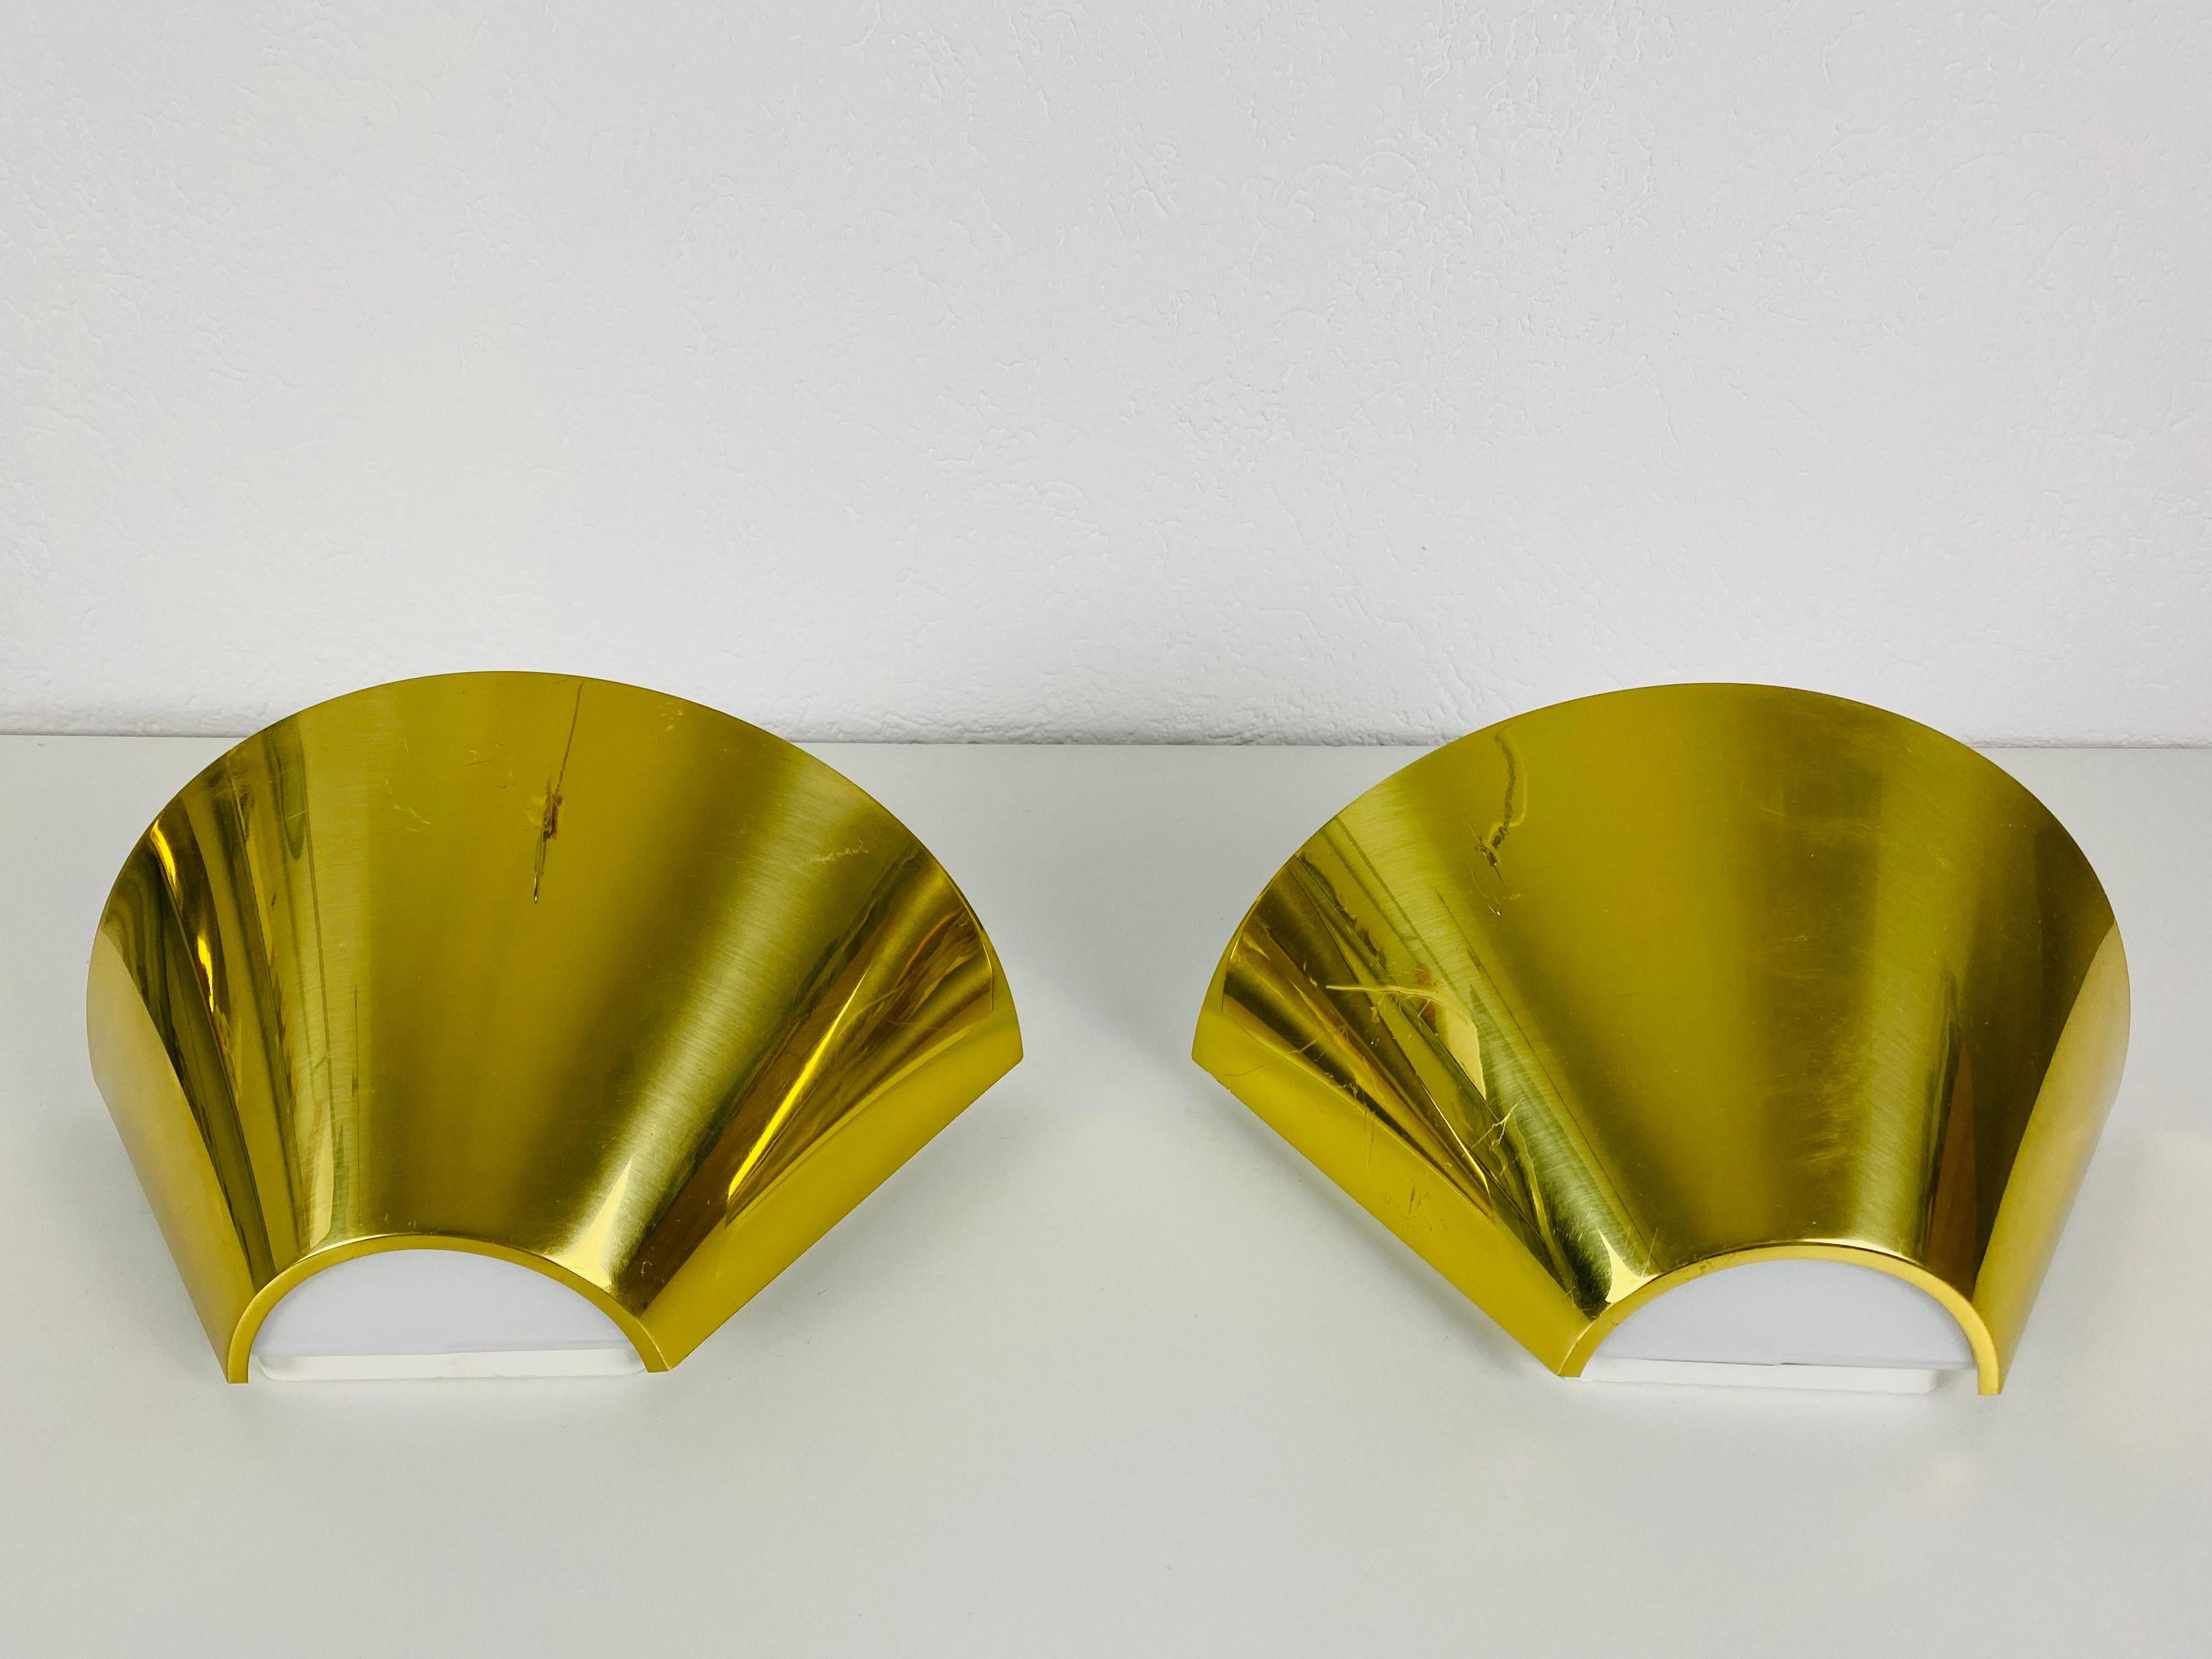 Pair of Modernist Brass and Opaline Glass Wall Lamps by Limburg, Germany, 1980s For Sale 2